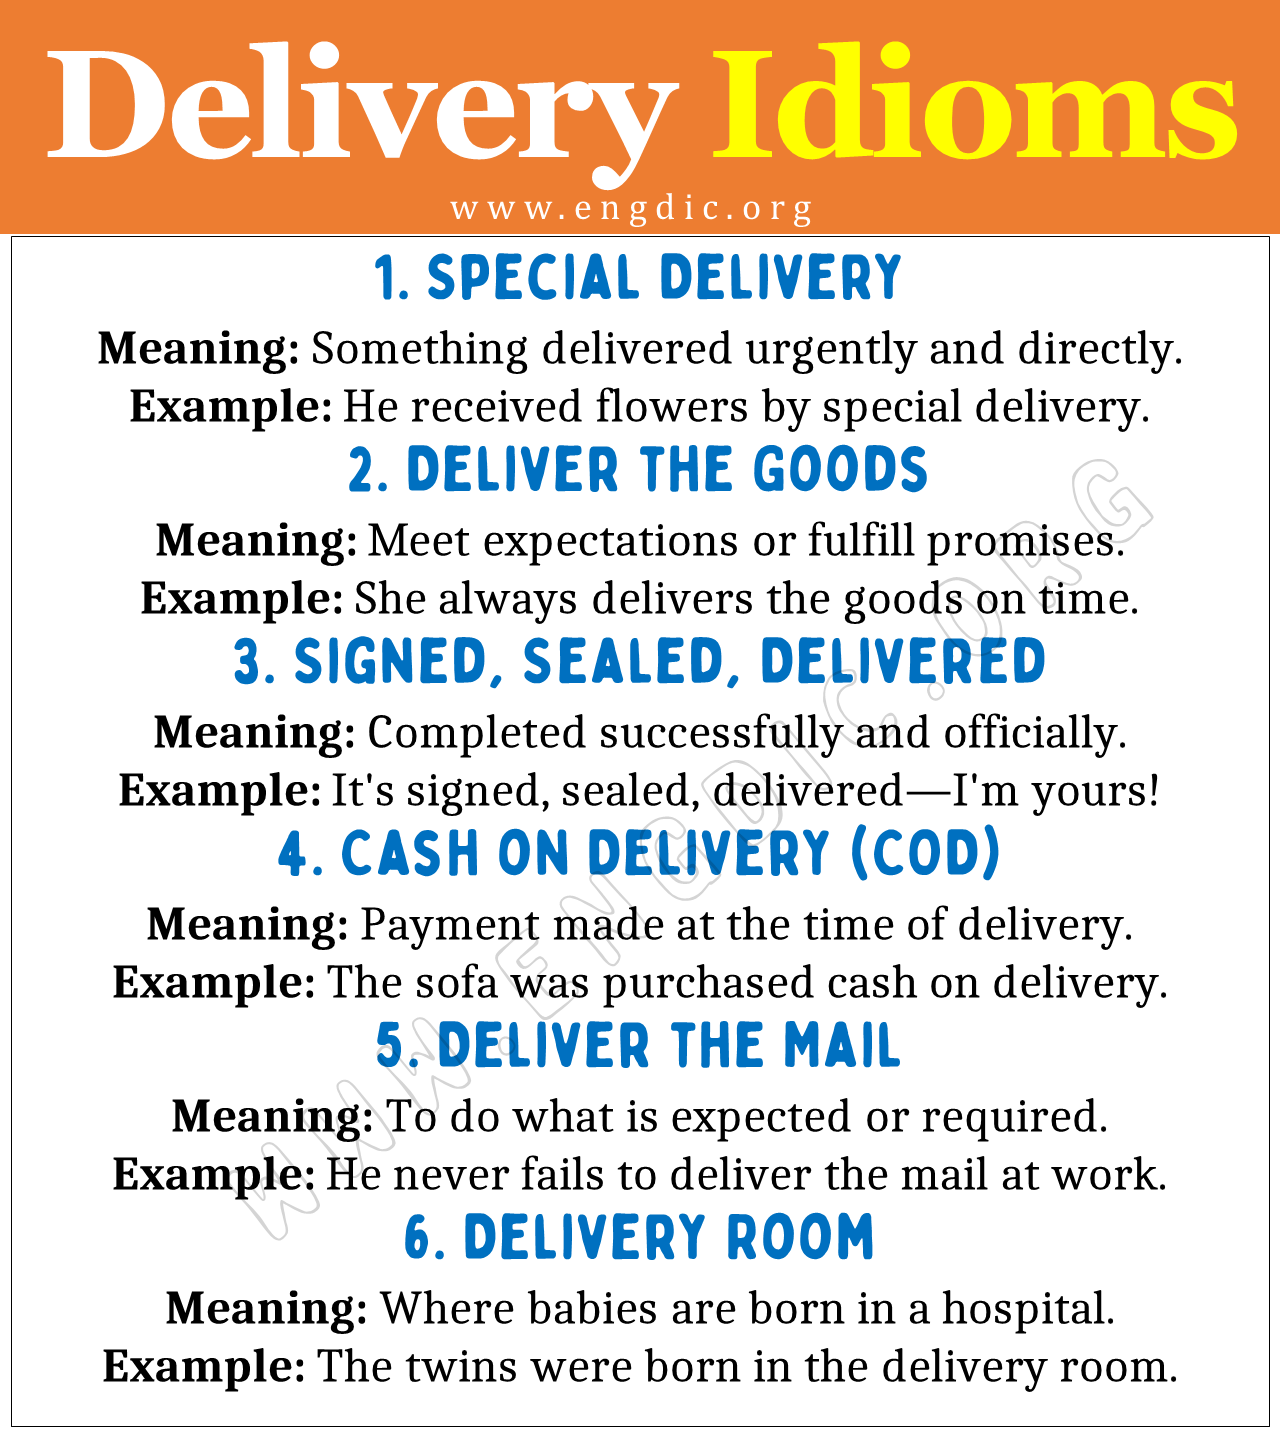 Delivery Idioms